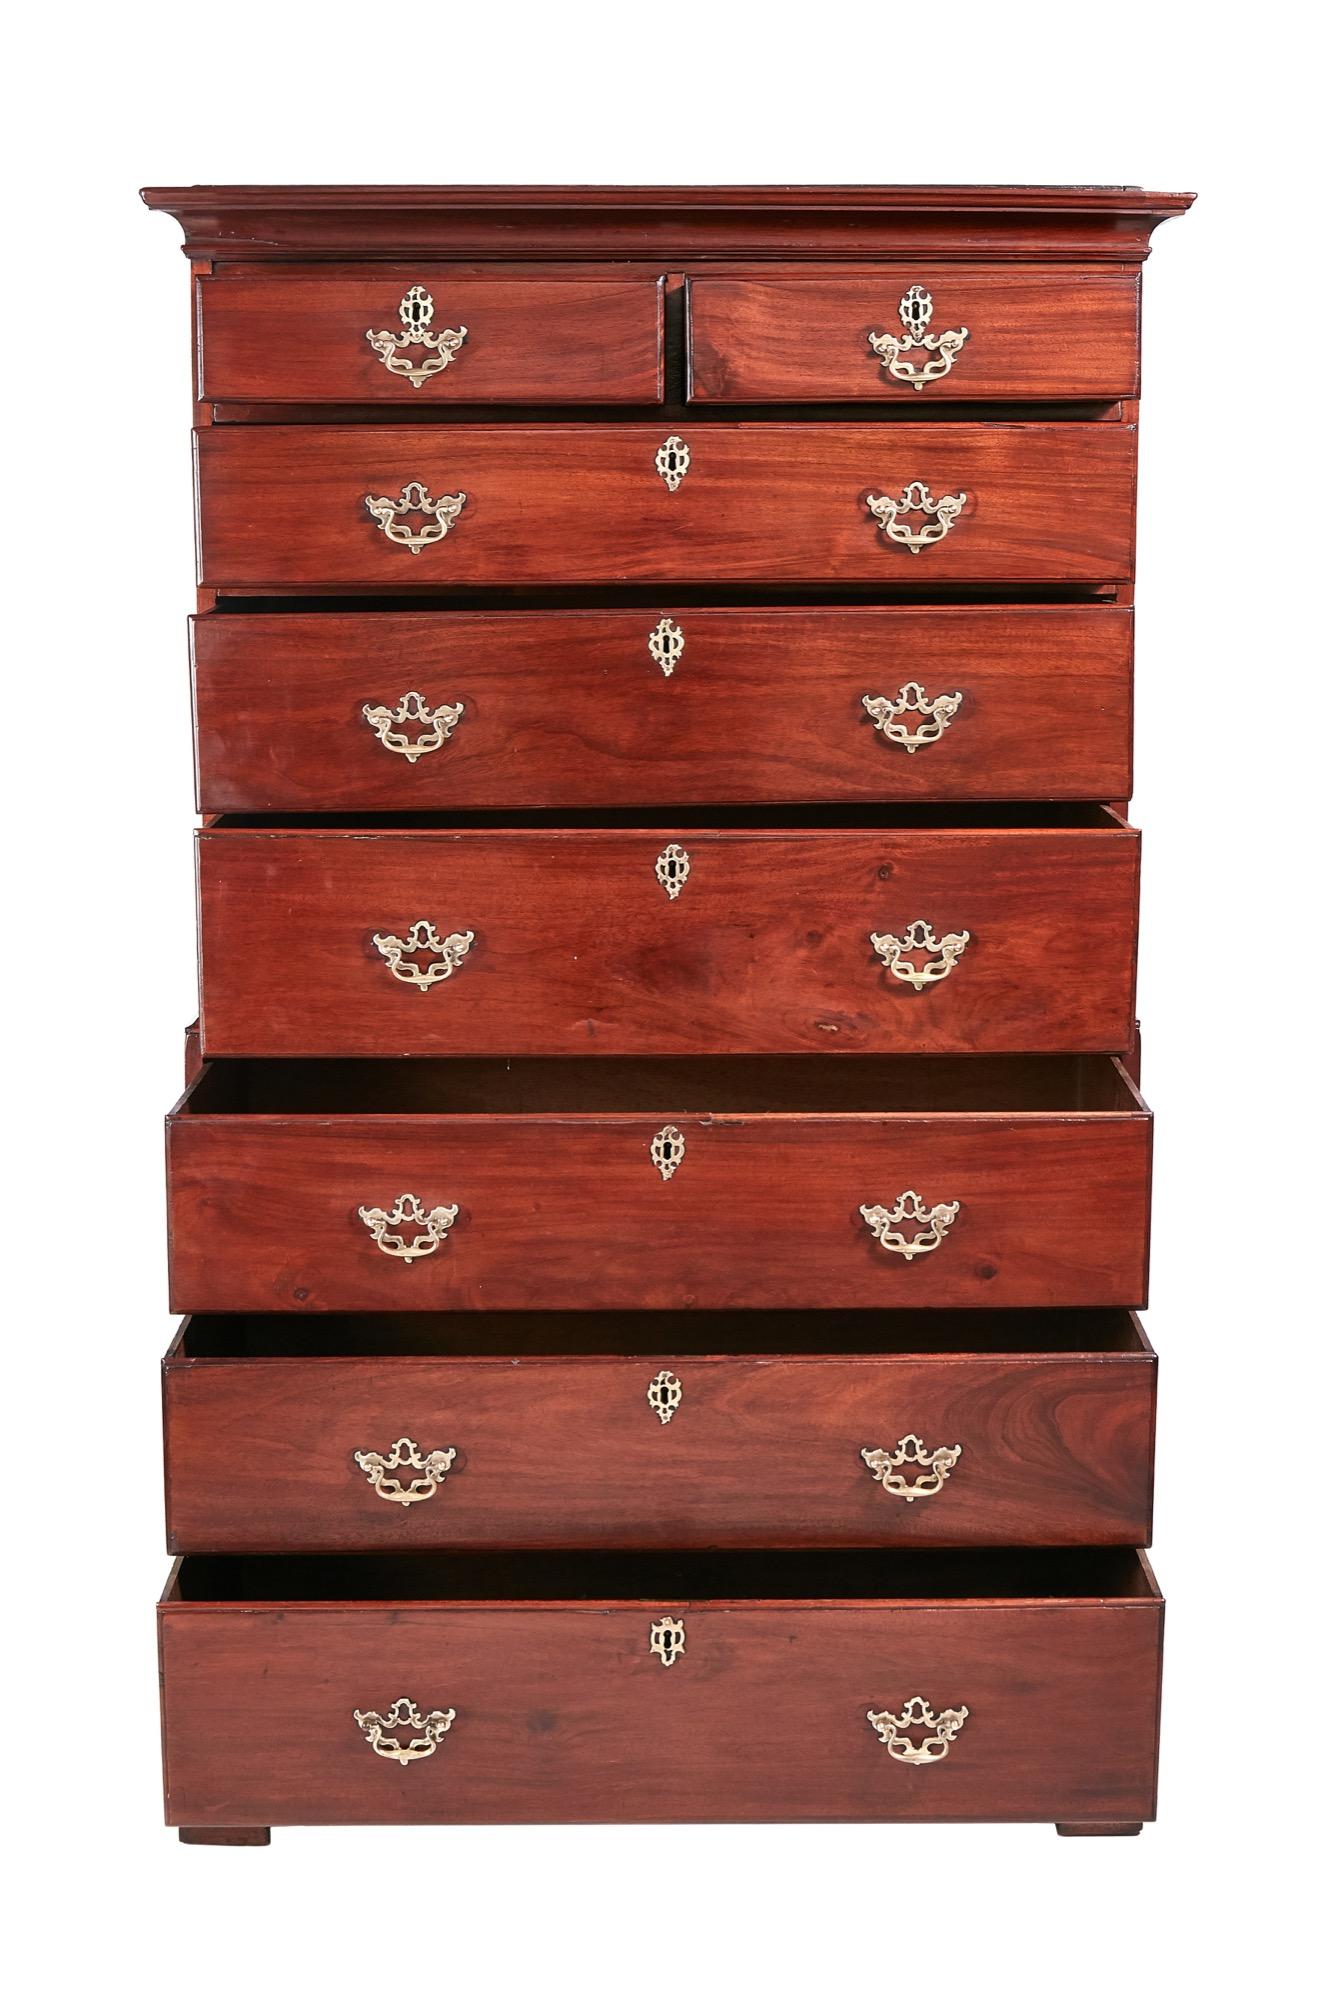 This antique George III mahogany chest on chest is a magnificent example of quality and craftsmanship from the Georgian period. It boasts a shaped moulded cornice above two short and three long graduated drawers. The base has three long drawers